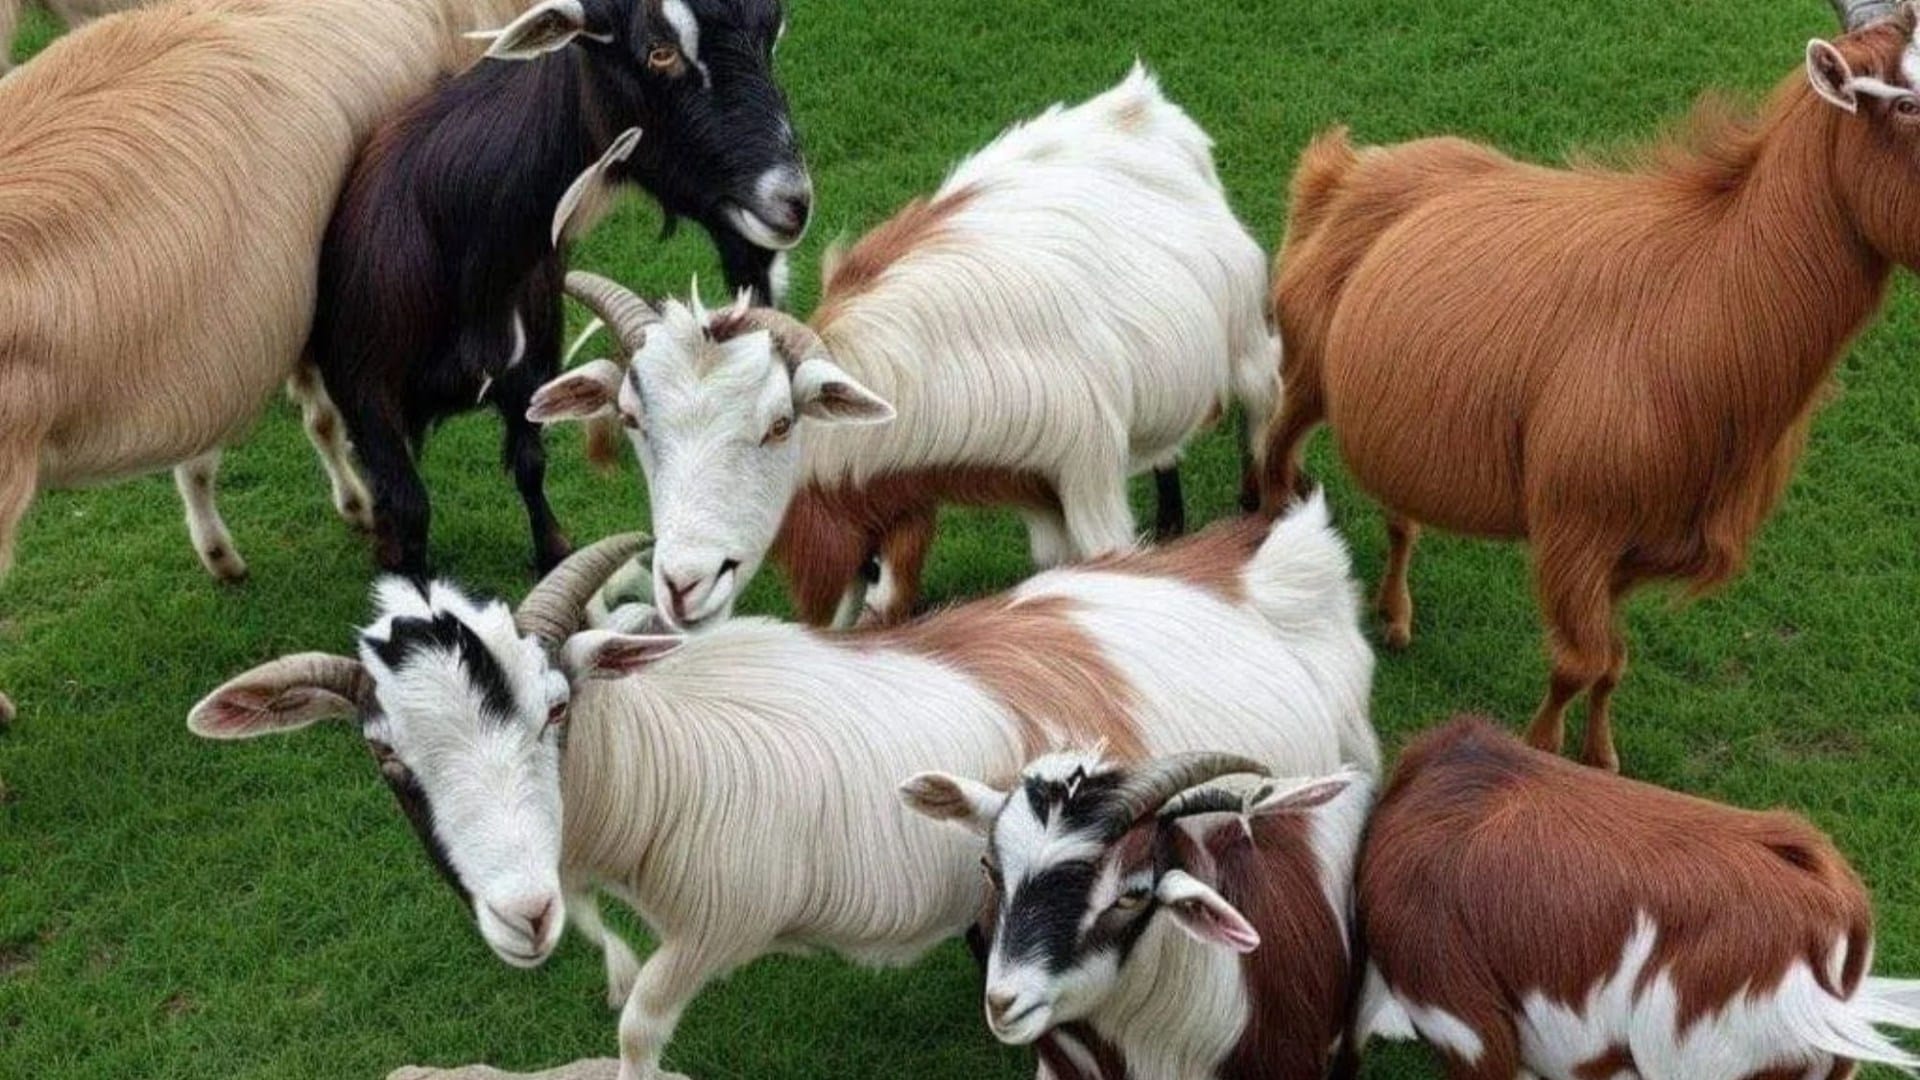 Legendary footballer is hiding in incredible farm animal optical illusion but can you see him?